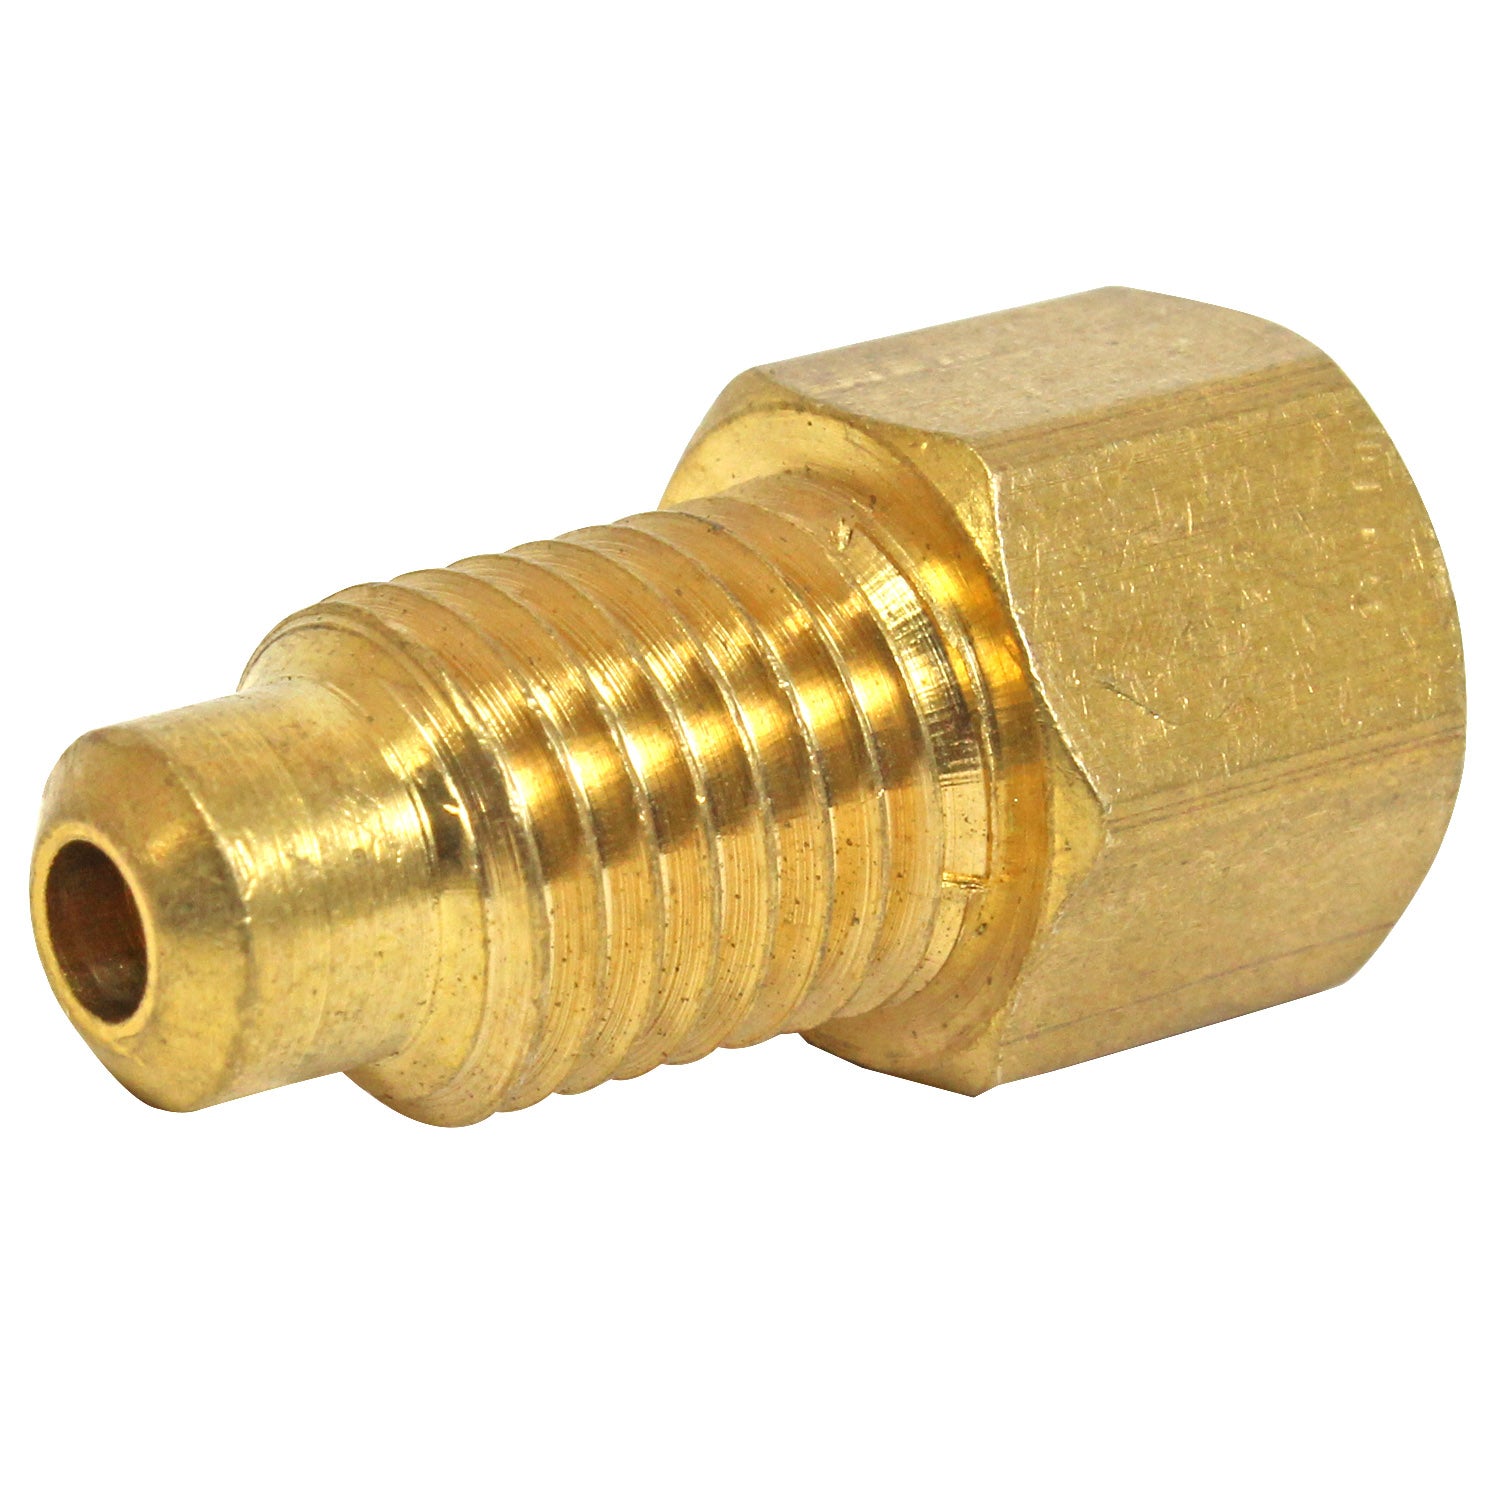 M10x1.0 to M10x1.0 Fitting - inverted Flare Female Adapter M10